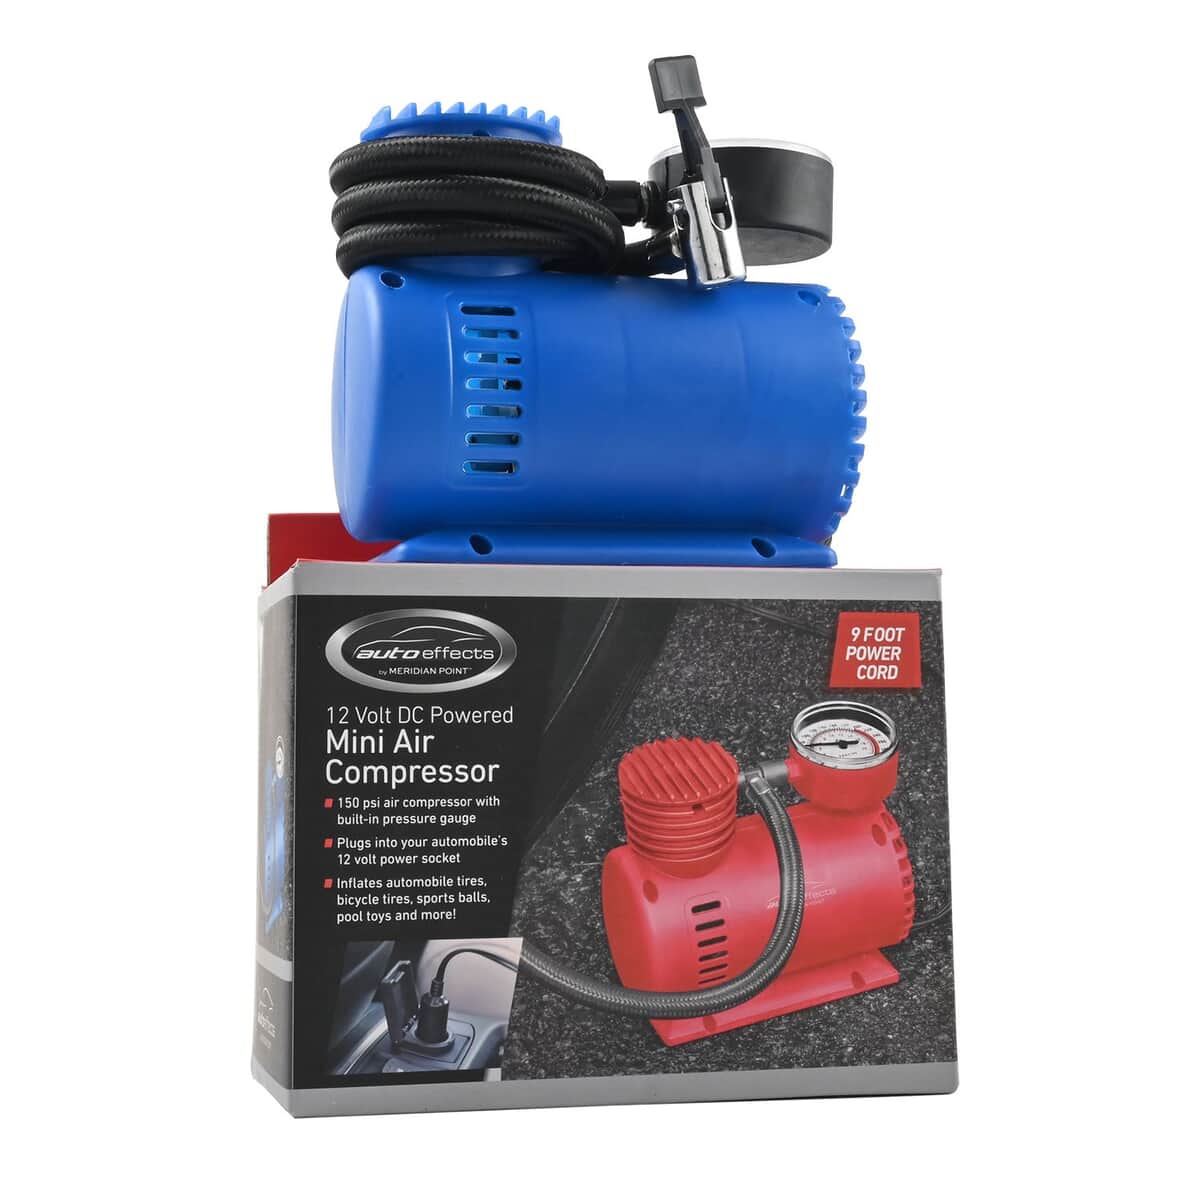 AUTO EFFECTS Mini Air Compressor with Built-in Pressure Gauge -Blue image number 0